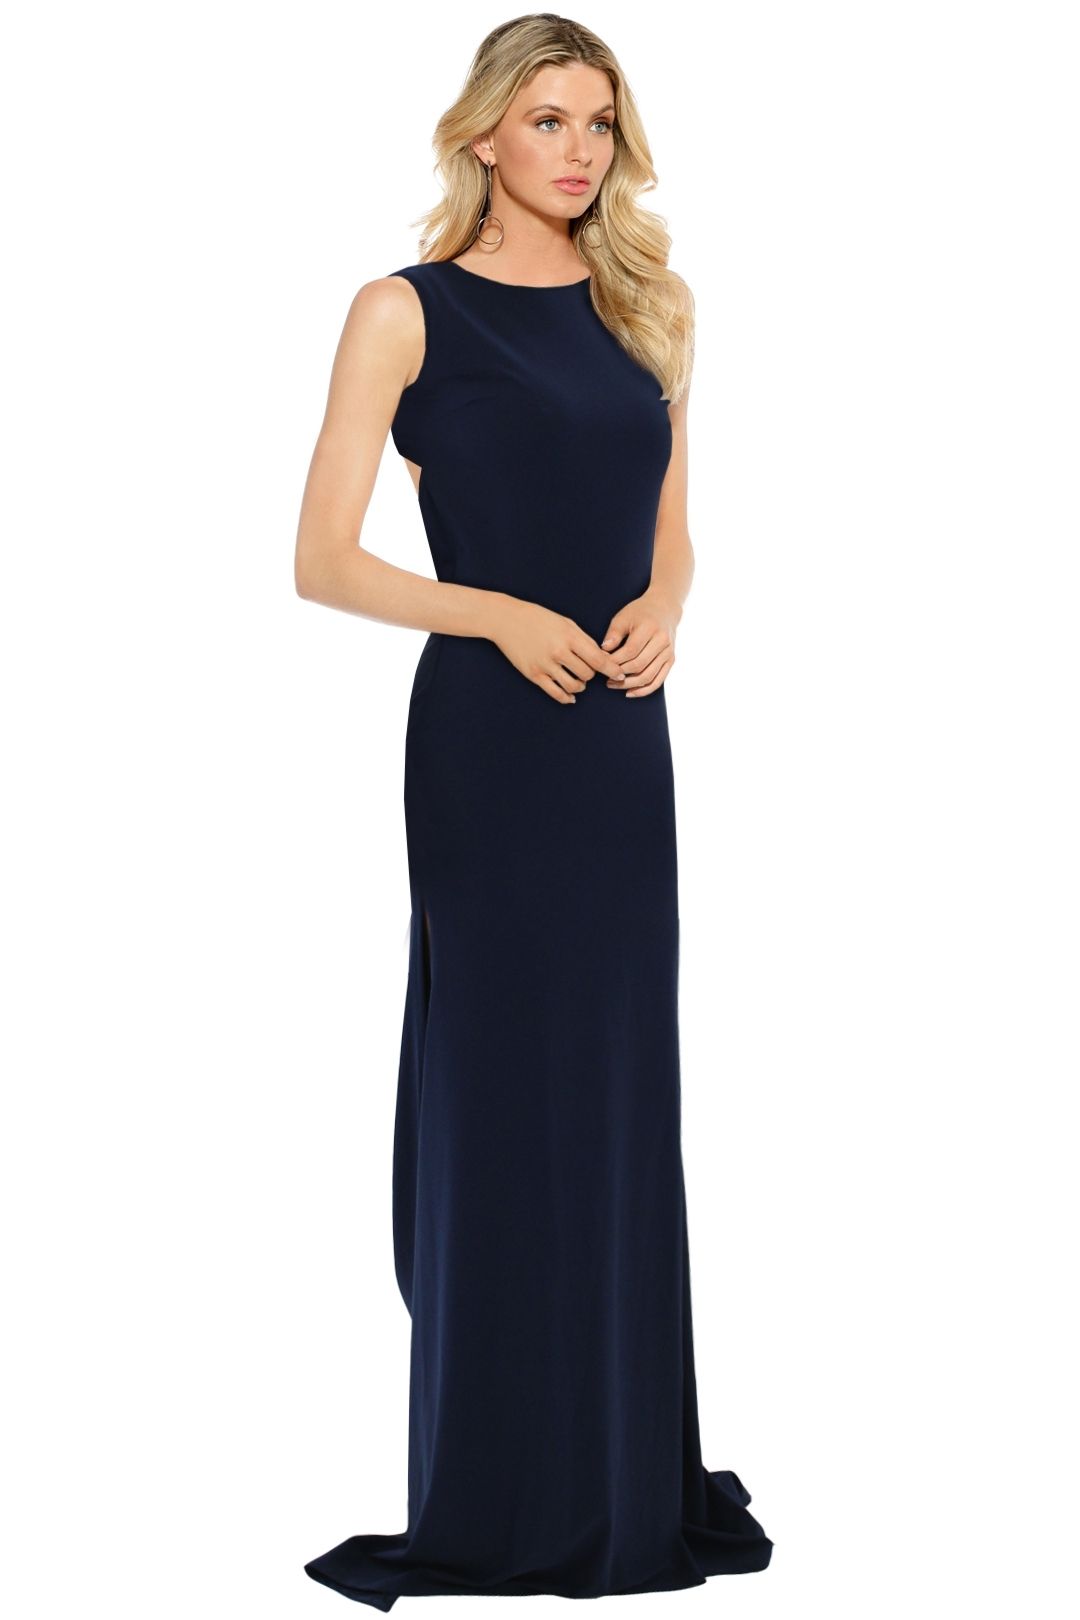 Anastasia Gown in Navy by When Freddie Met Lilly for Rent